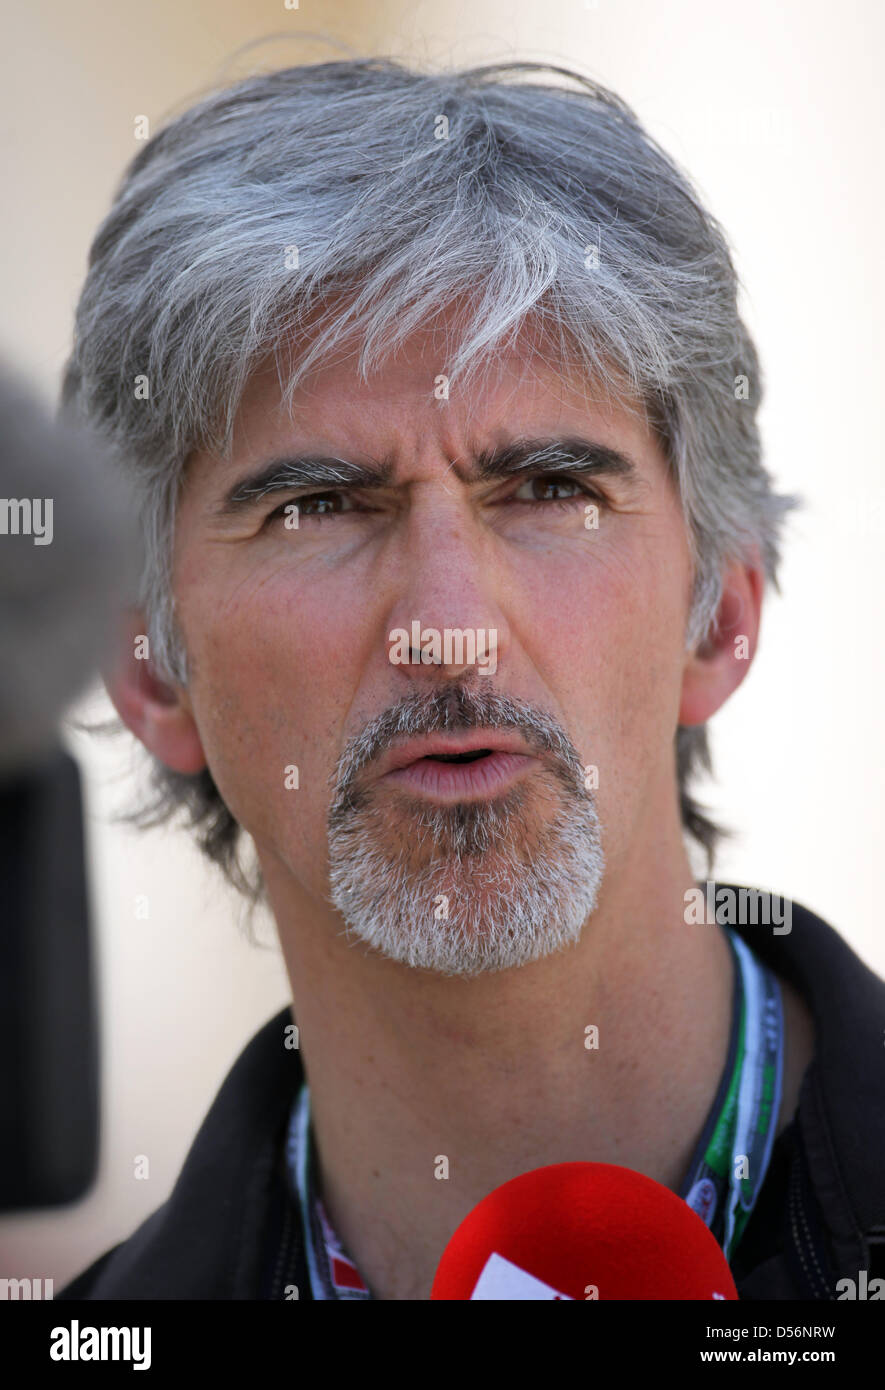 Former Formula One champion Damon Hill pictured at the Formula One Grand Prix of Bahrain at Sakhir race track near Manama, Bahrain, 14 March 2010. The Grand Prix of Bahrain kicked off the 2010 Formula One season. Foto: Jens Buettner Stock Photo